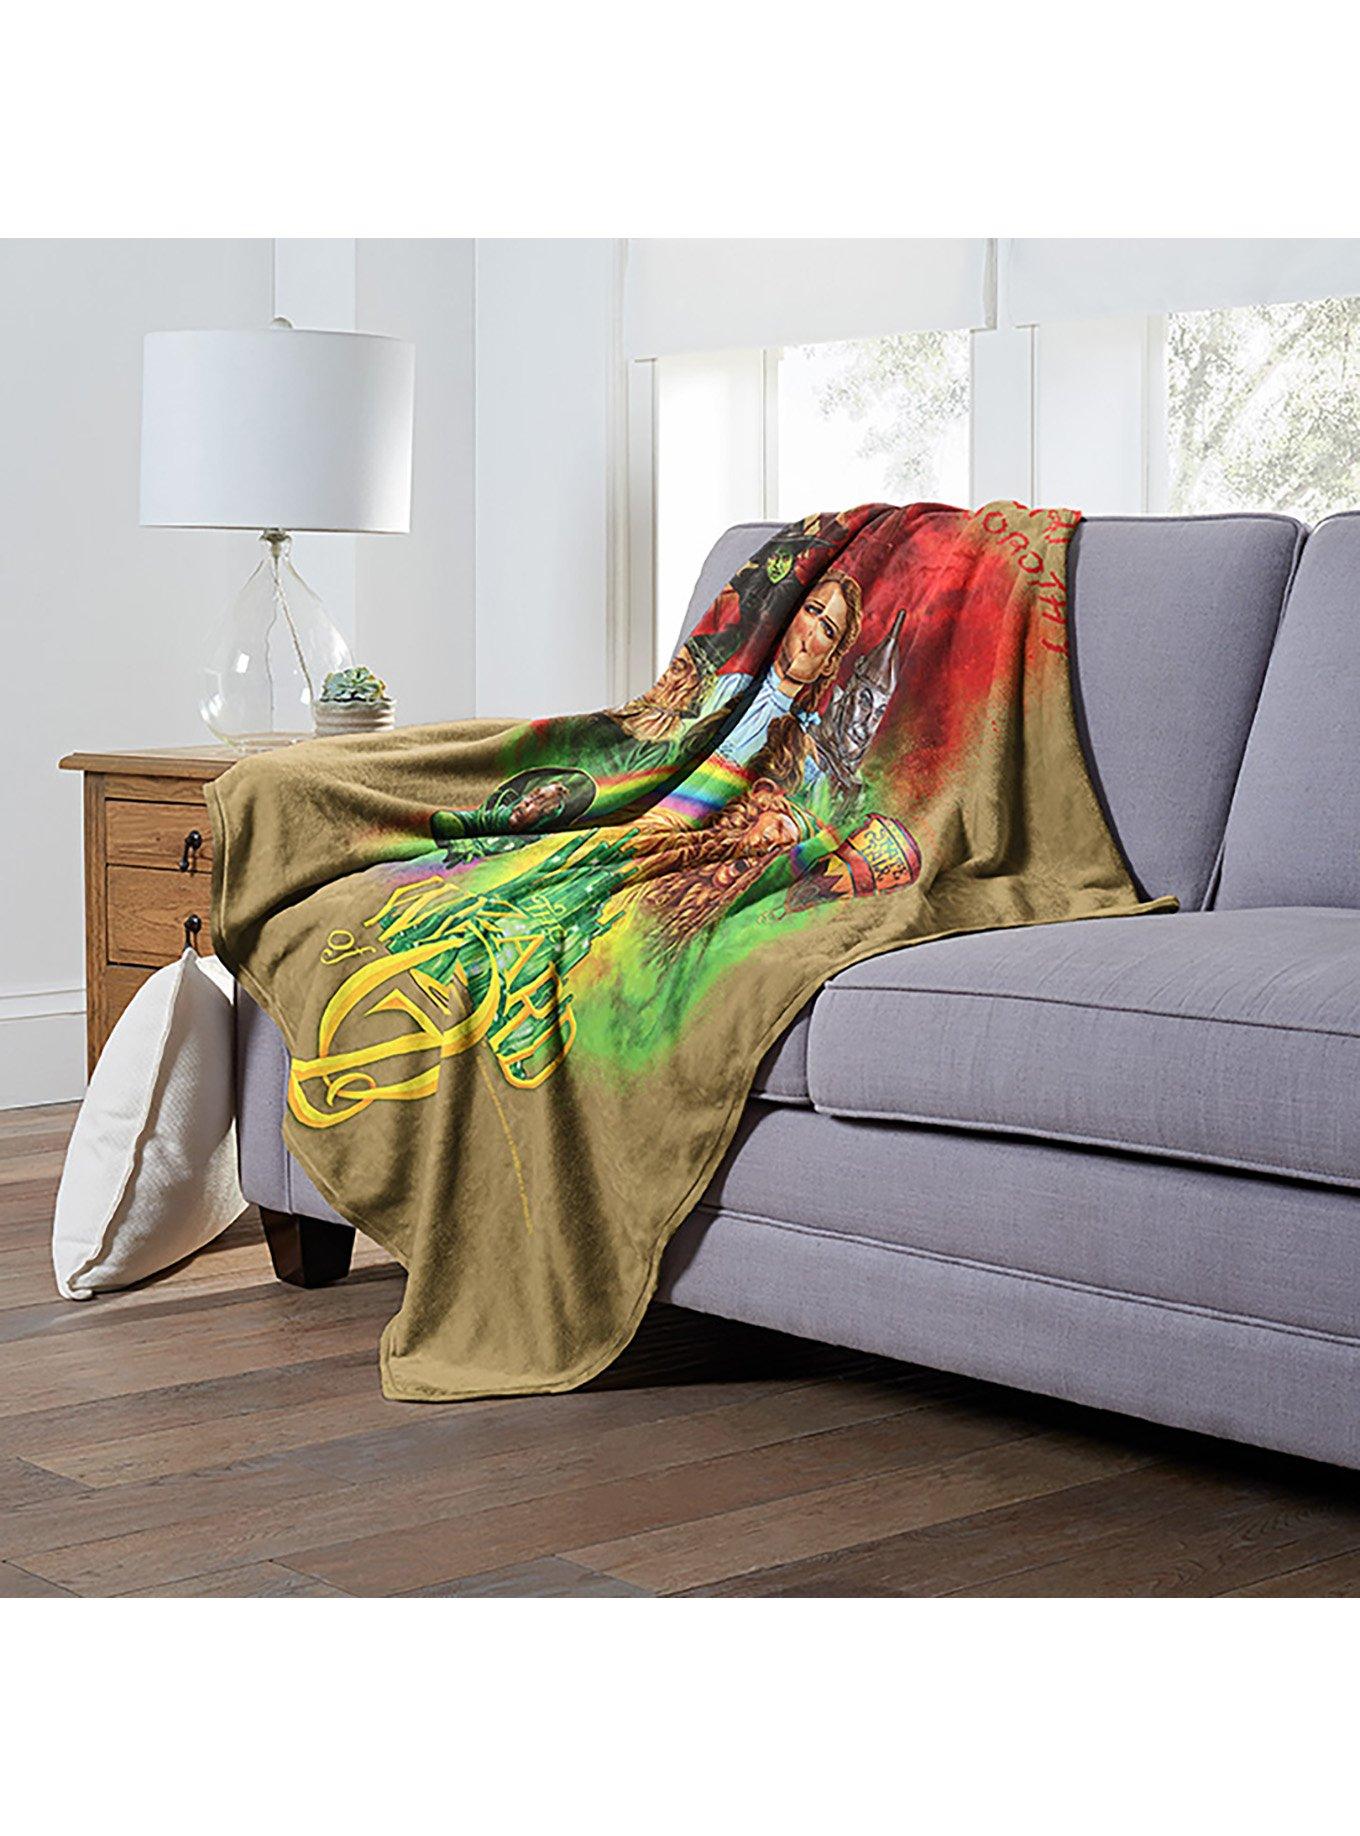 WB 100 The Wizard Of Oz Surrender Dorothy Silk Touch Throw, , alternate